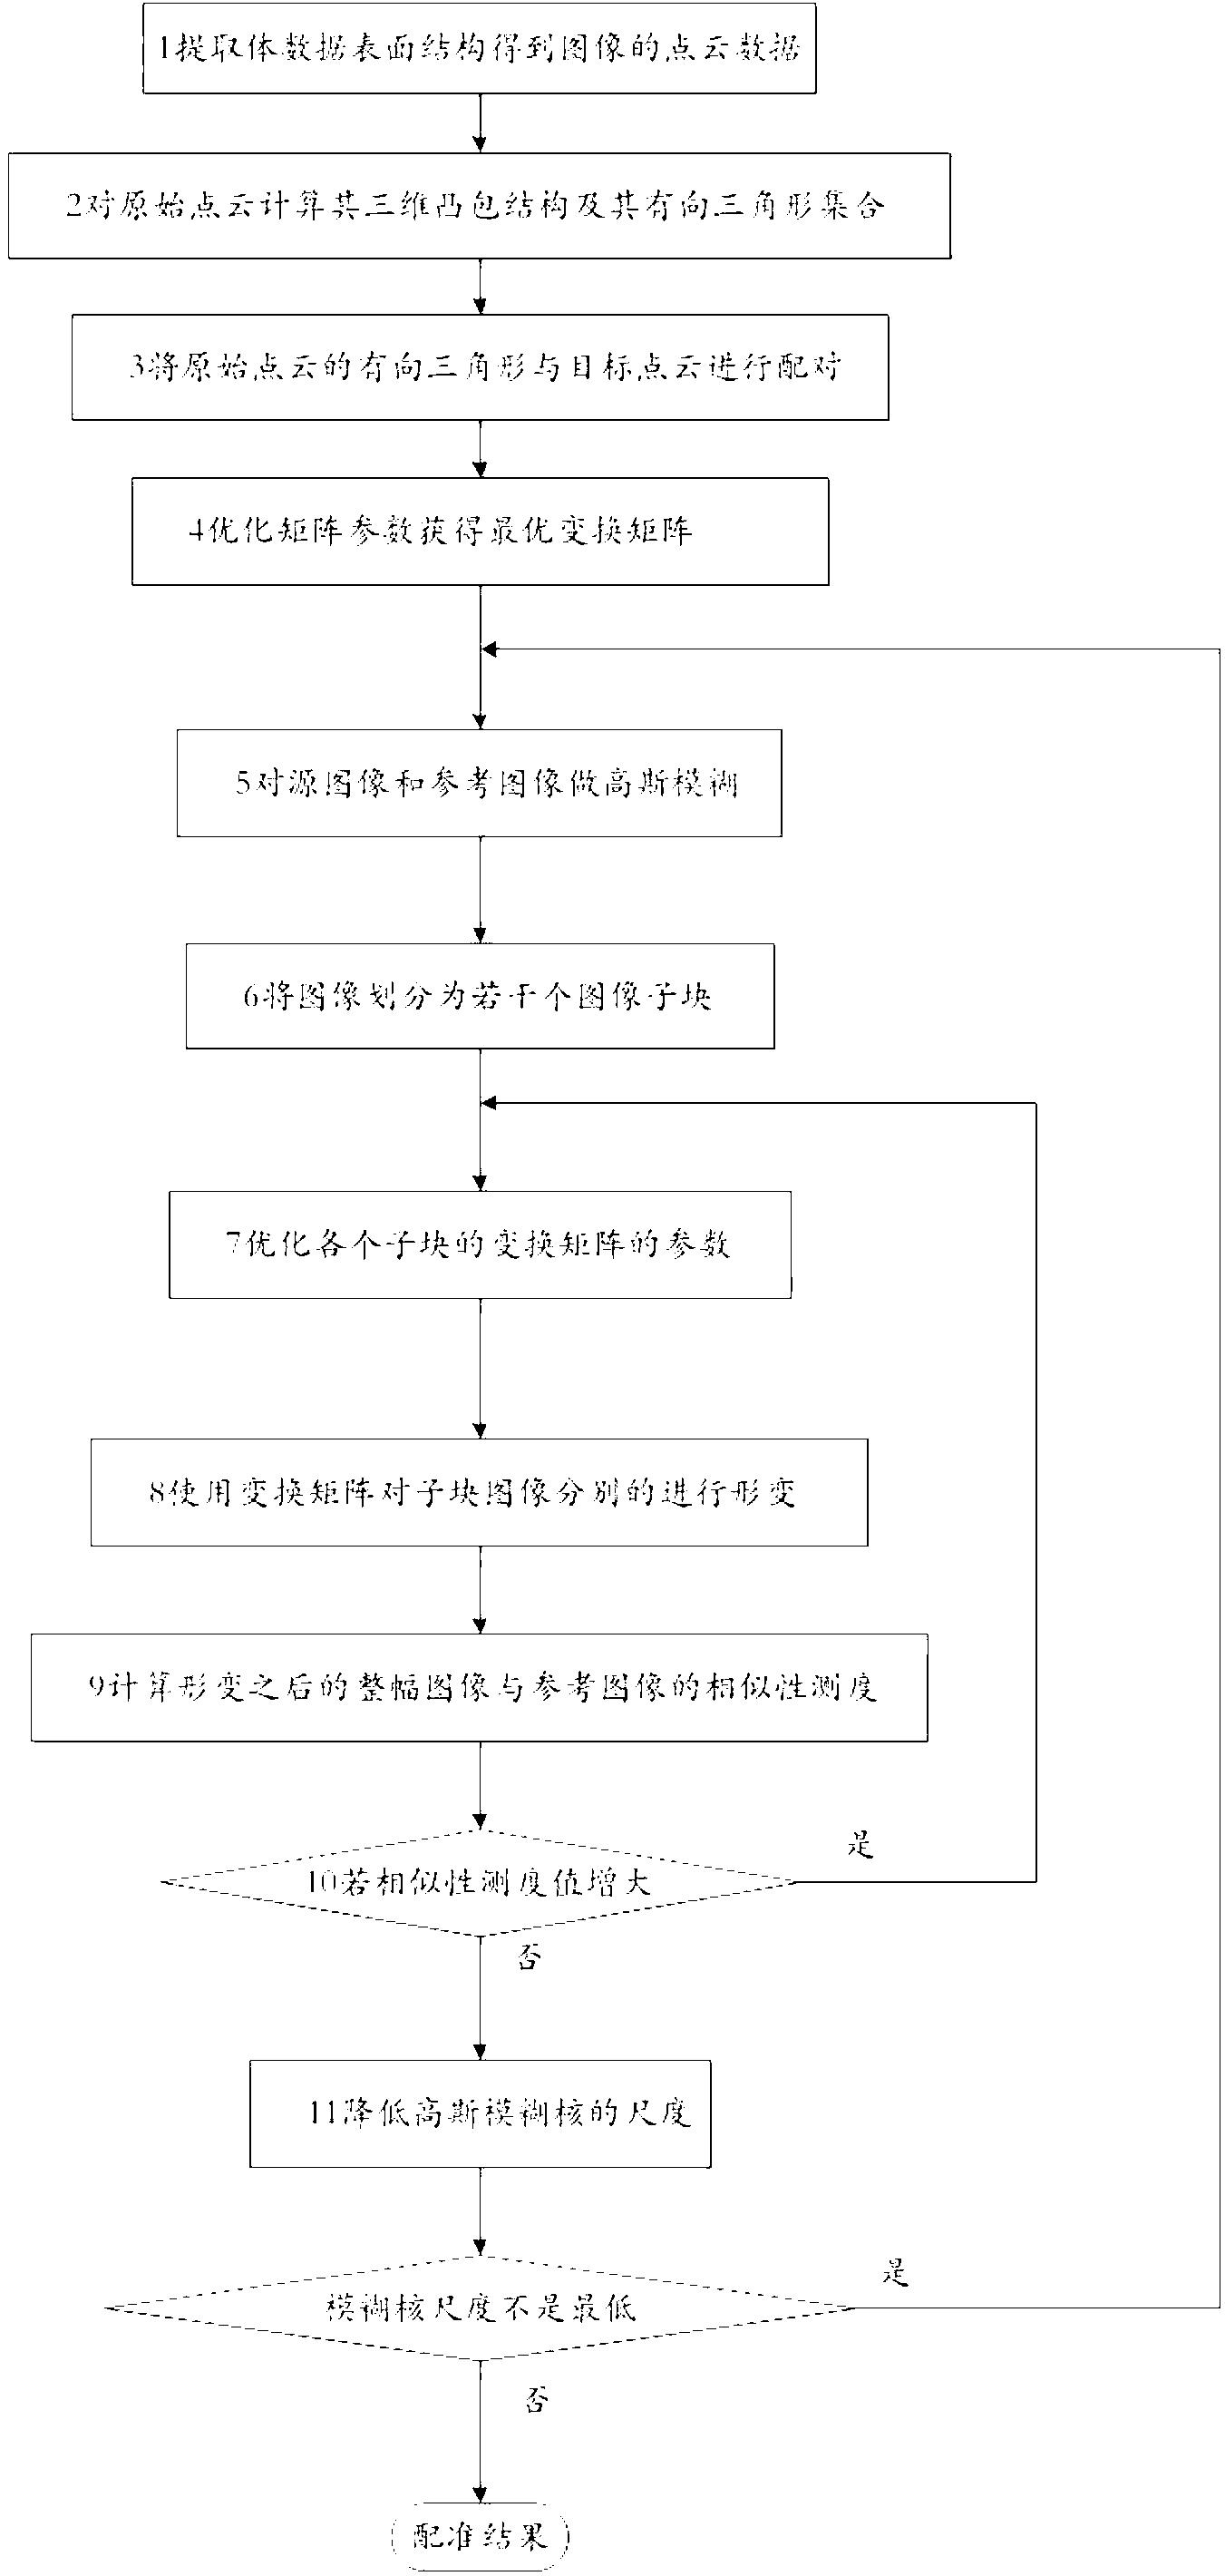 Method for elastically registering medical images by aid of combined convex hull matching and multi-scale classification strategy